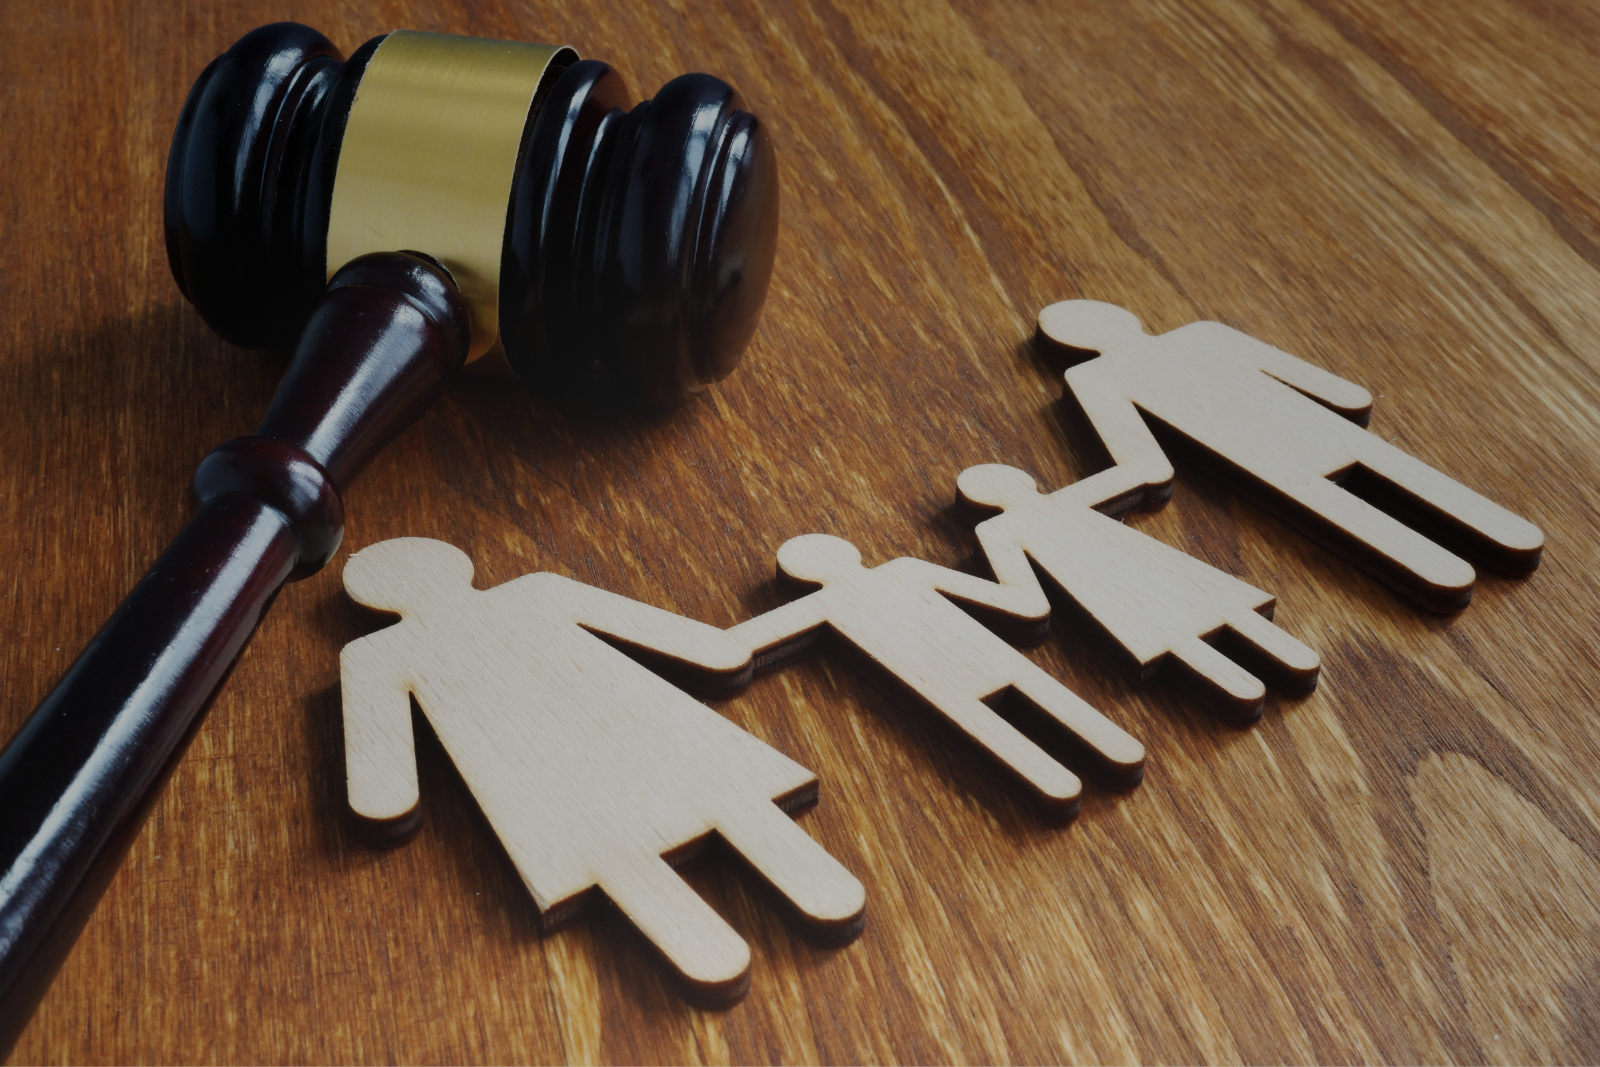 Family Court Merger, Federal Circuit Court of Australia, parliament bill, family law, Courts, Lighthouse Project, Ivy Law Group, Sydney Family Lawyers